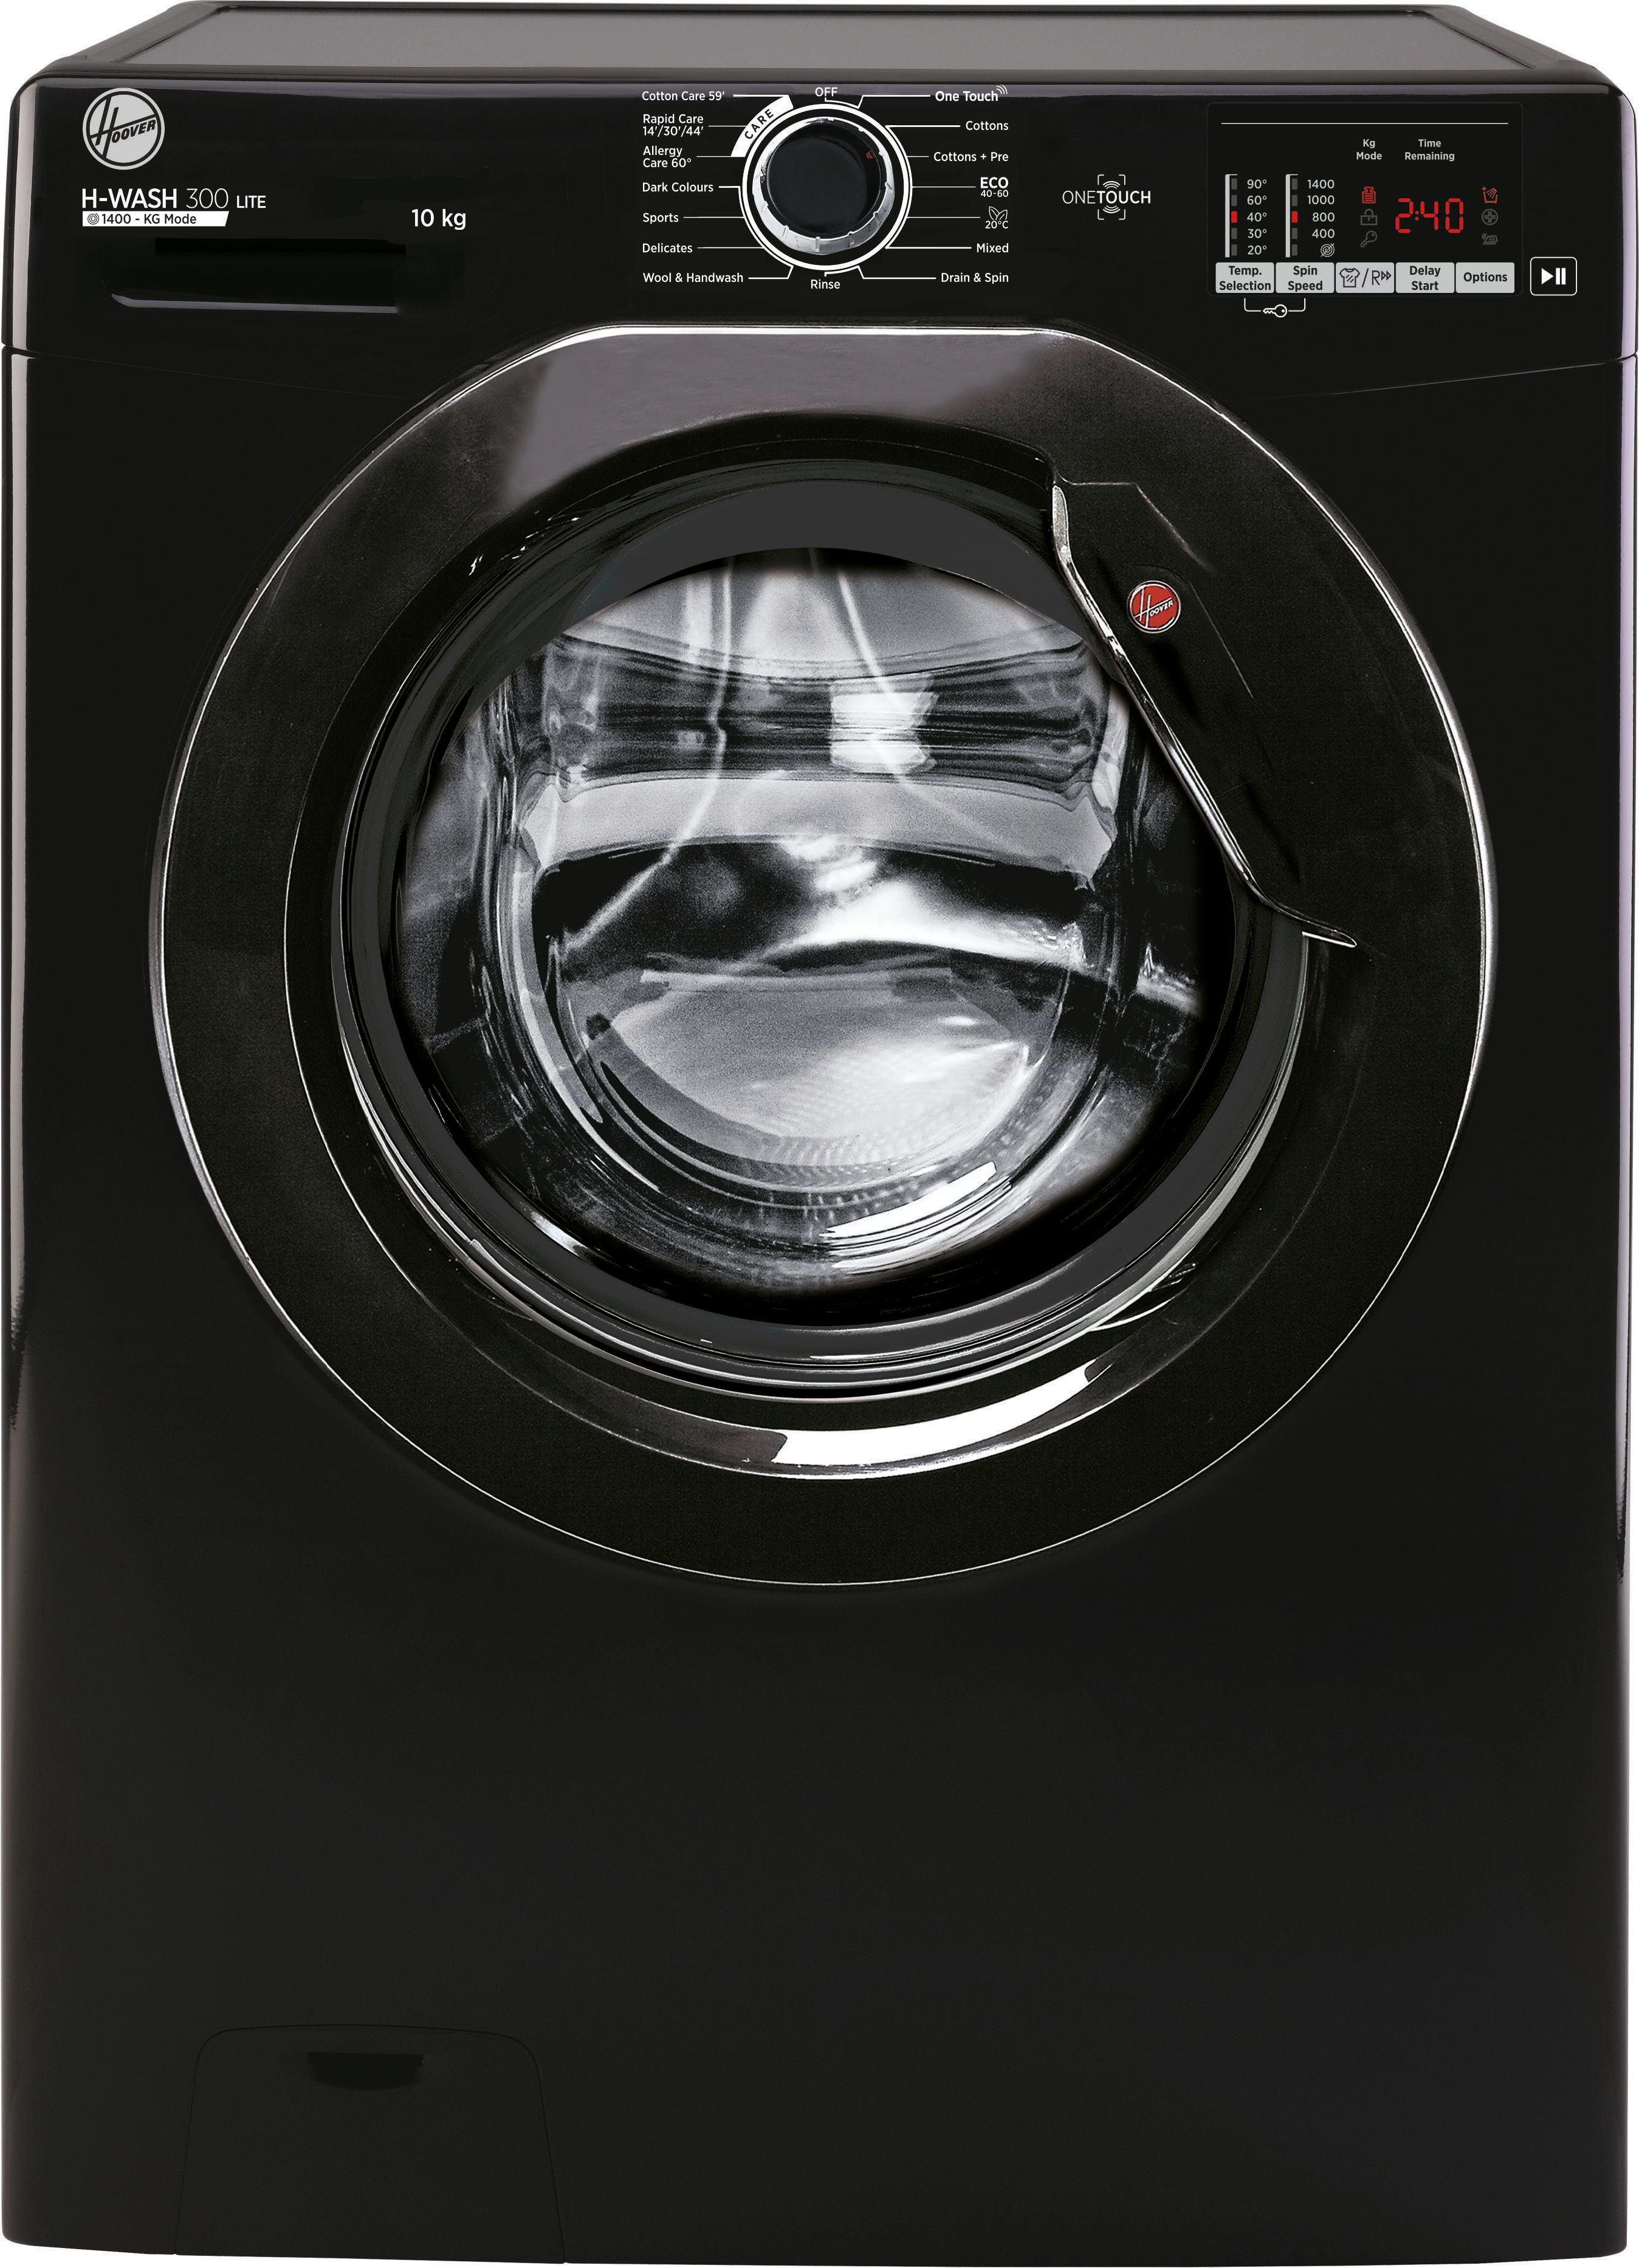 Hoover H-WASH 300 LITE H3W4102DABBE 10kg Washing Machine with 1400 rpm - Black - C Rated, Black